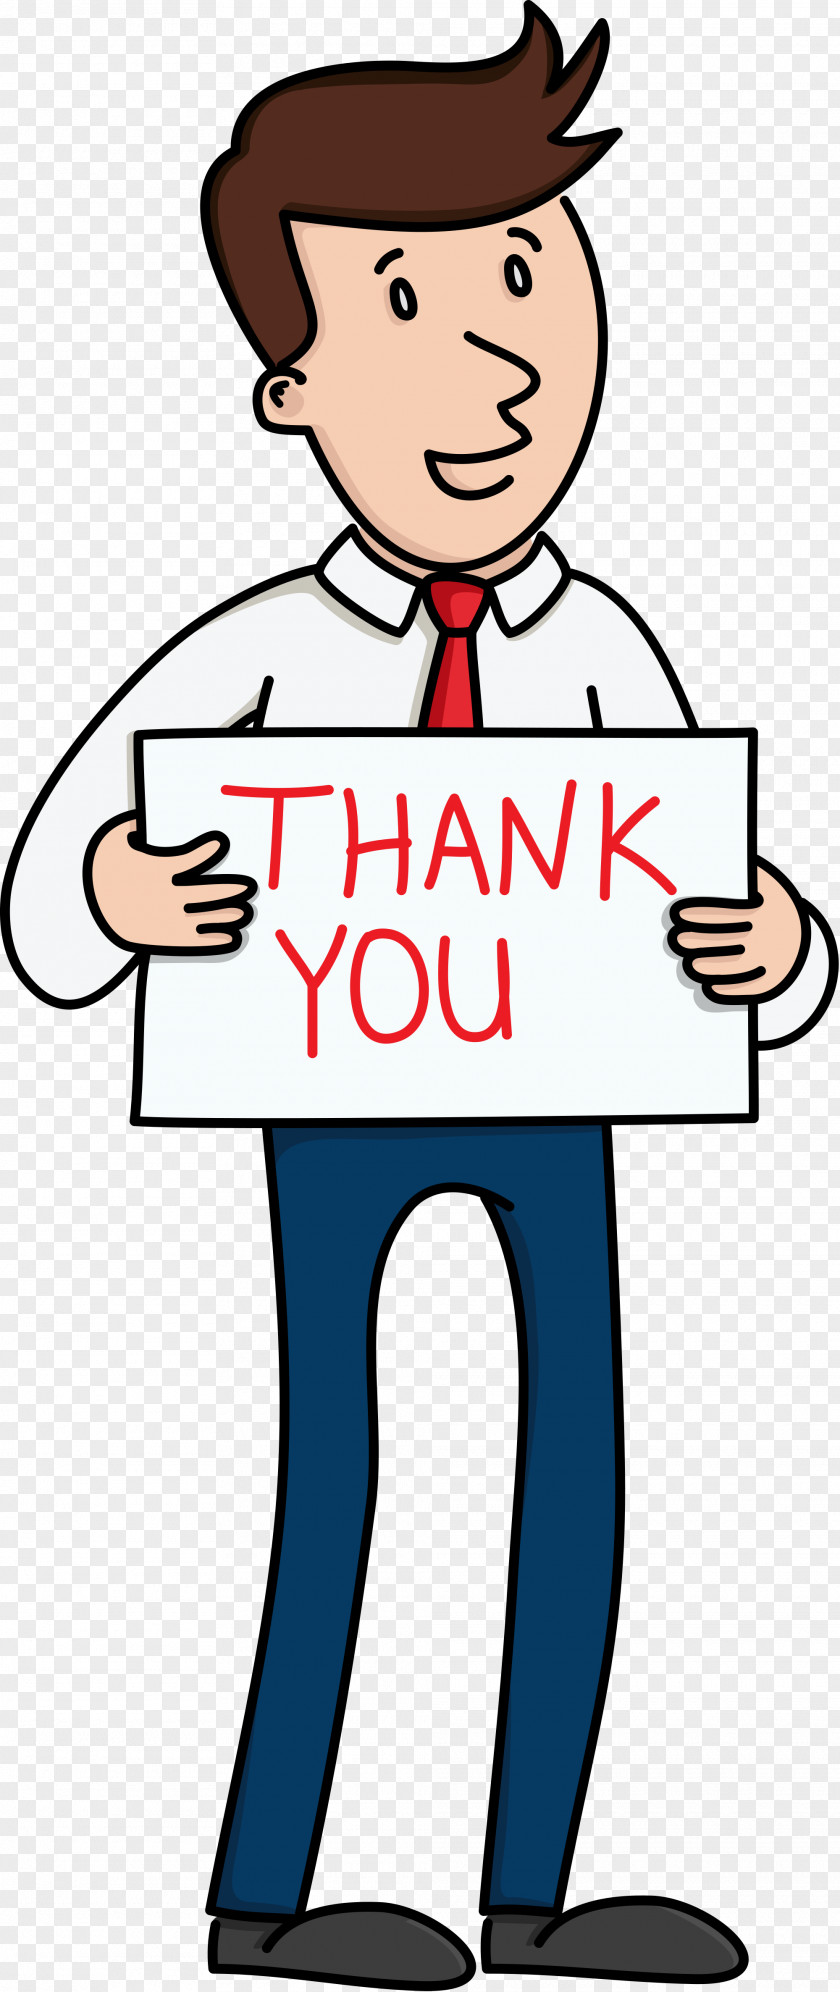 Thank You Vector Graphics Illustration Image Cartoon PNG